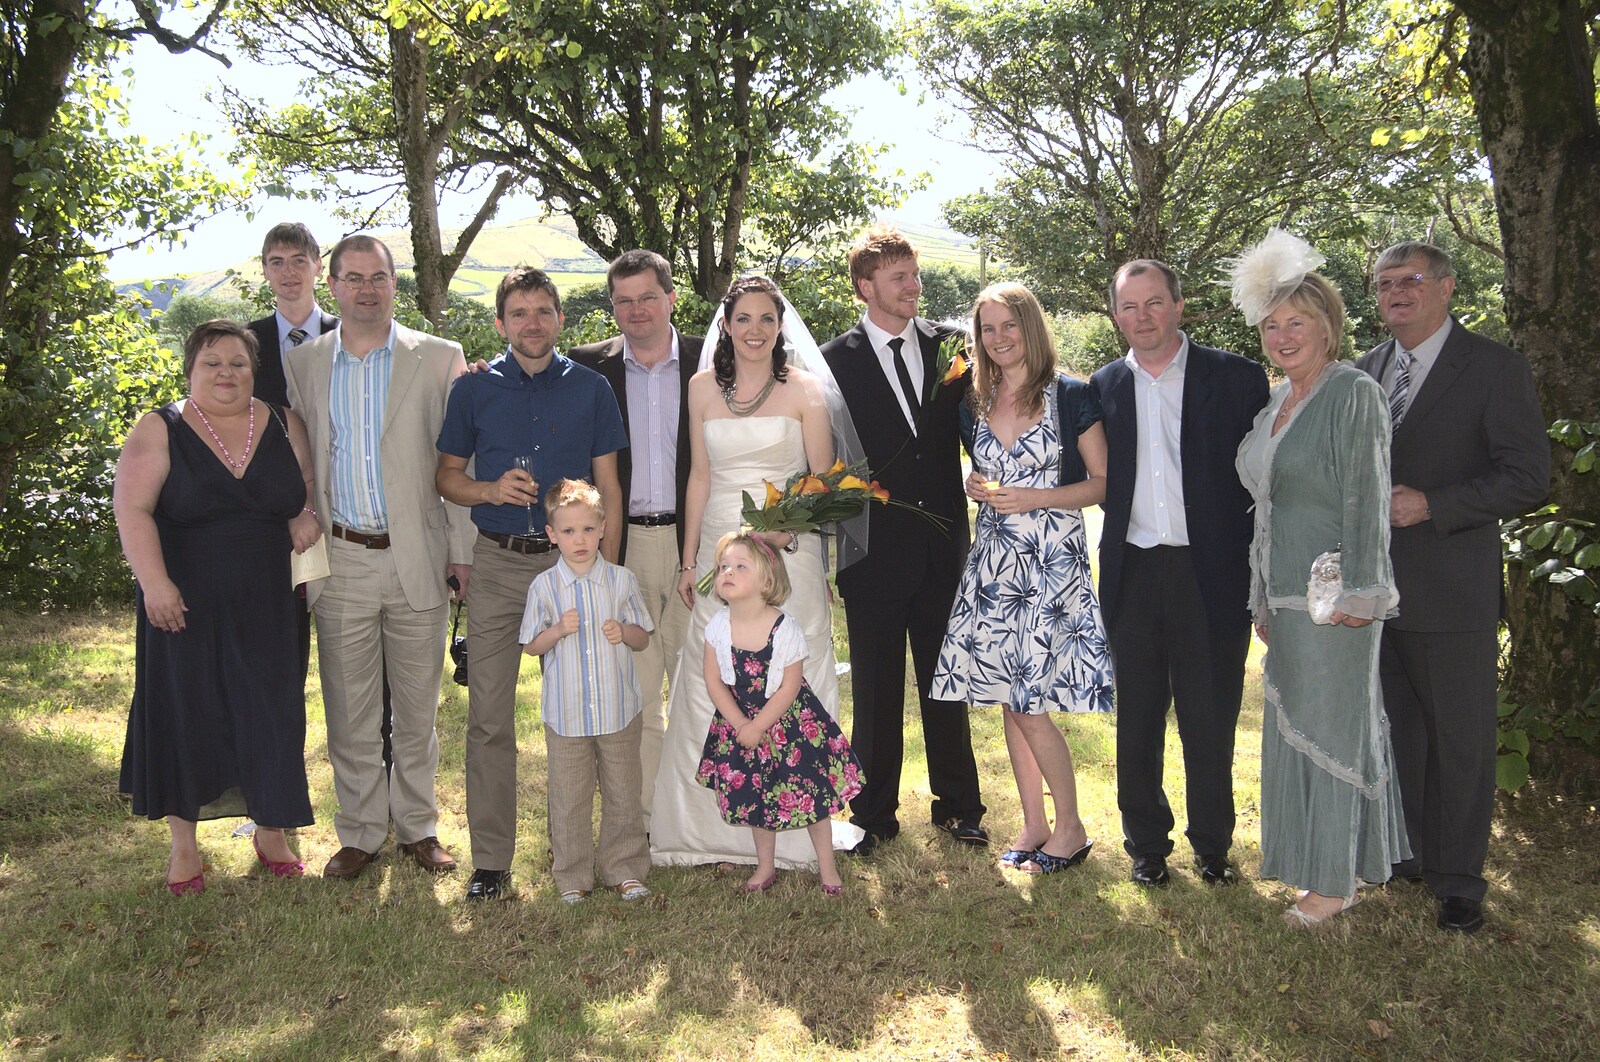 A group wedding photo from Julie and Cameron's Wedding, Ballintaggart House, Dingle - 24th July 2009